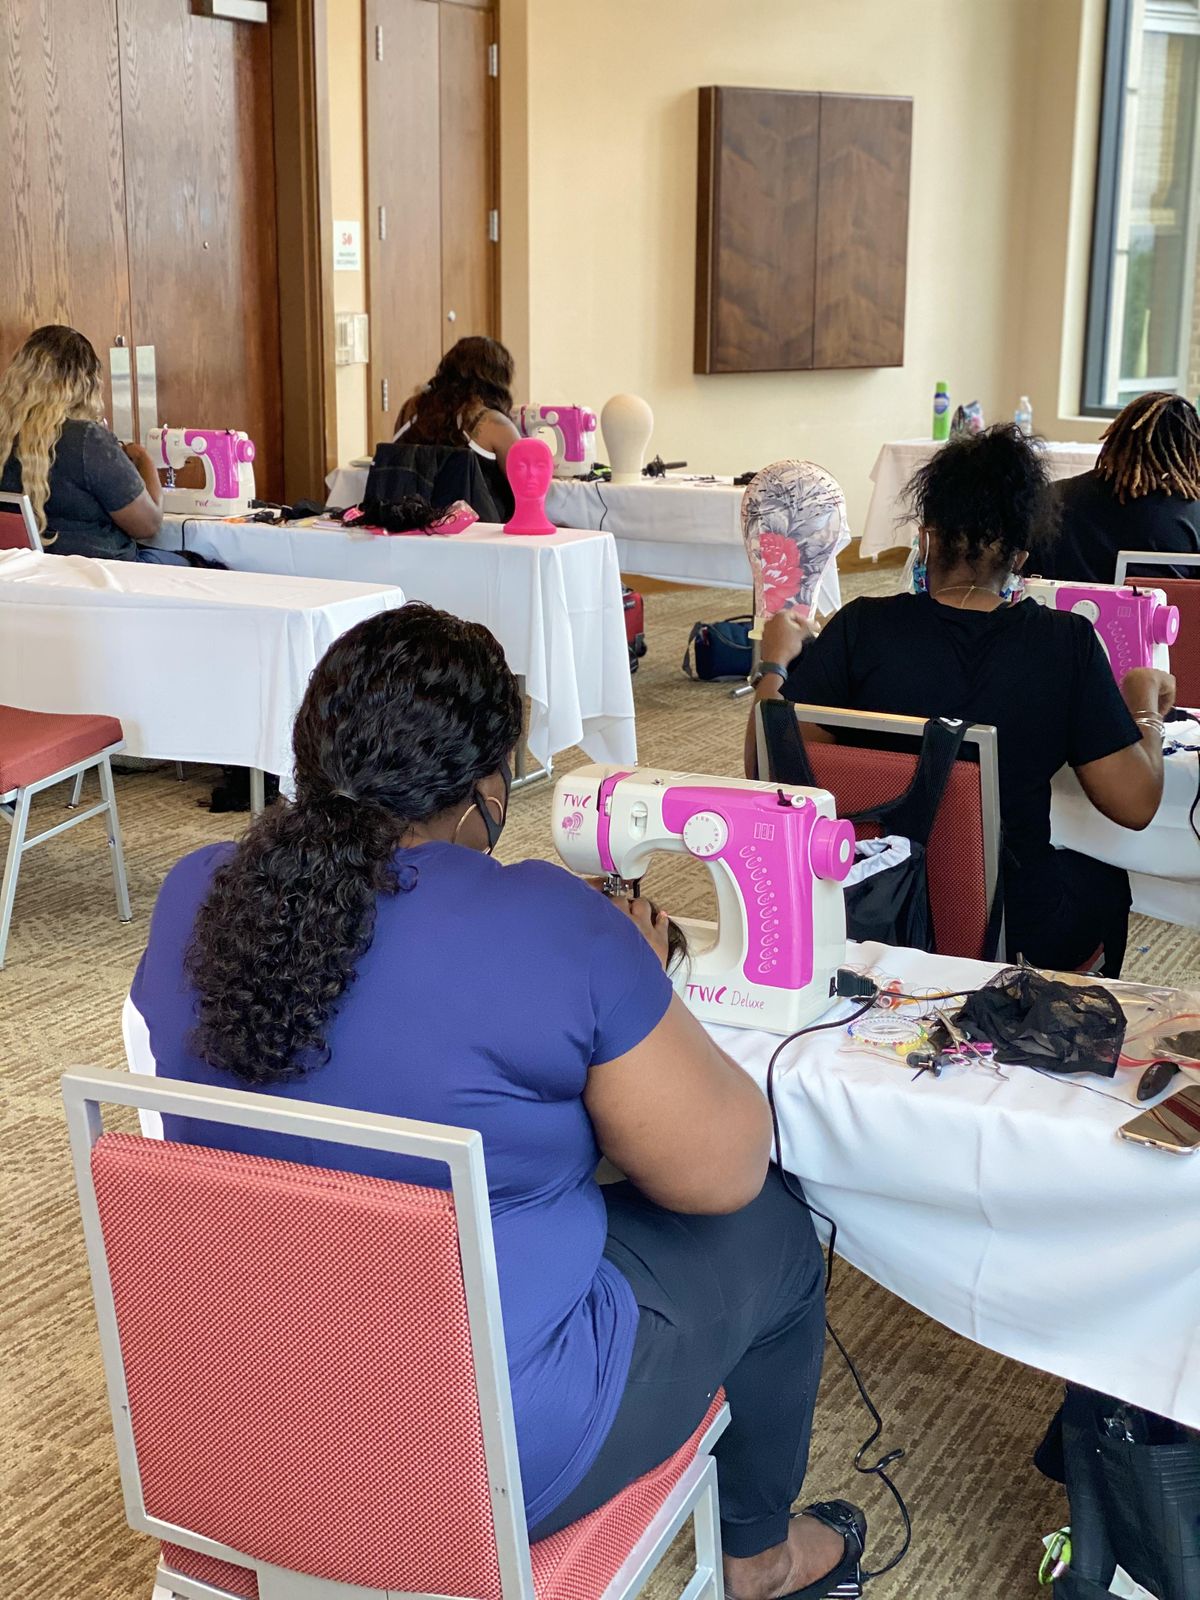 Washington DC | Lace Front Wig Making Class with Sewing Machine